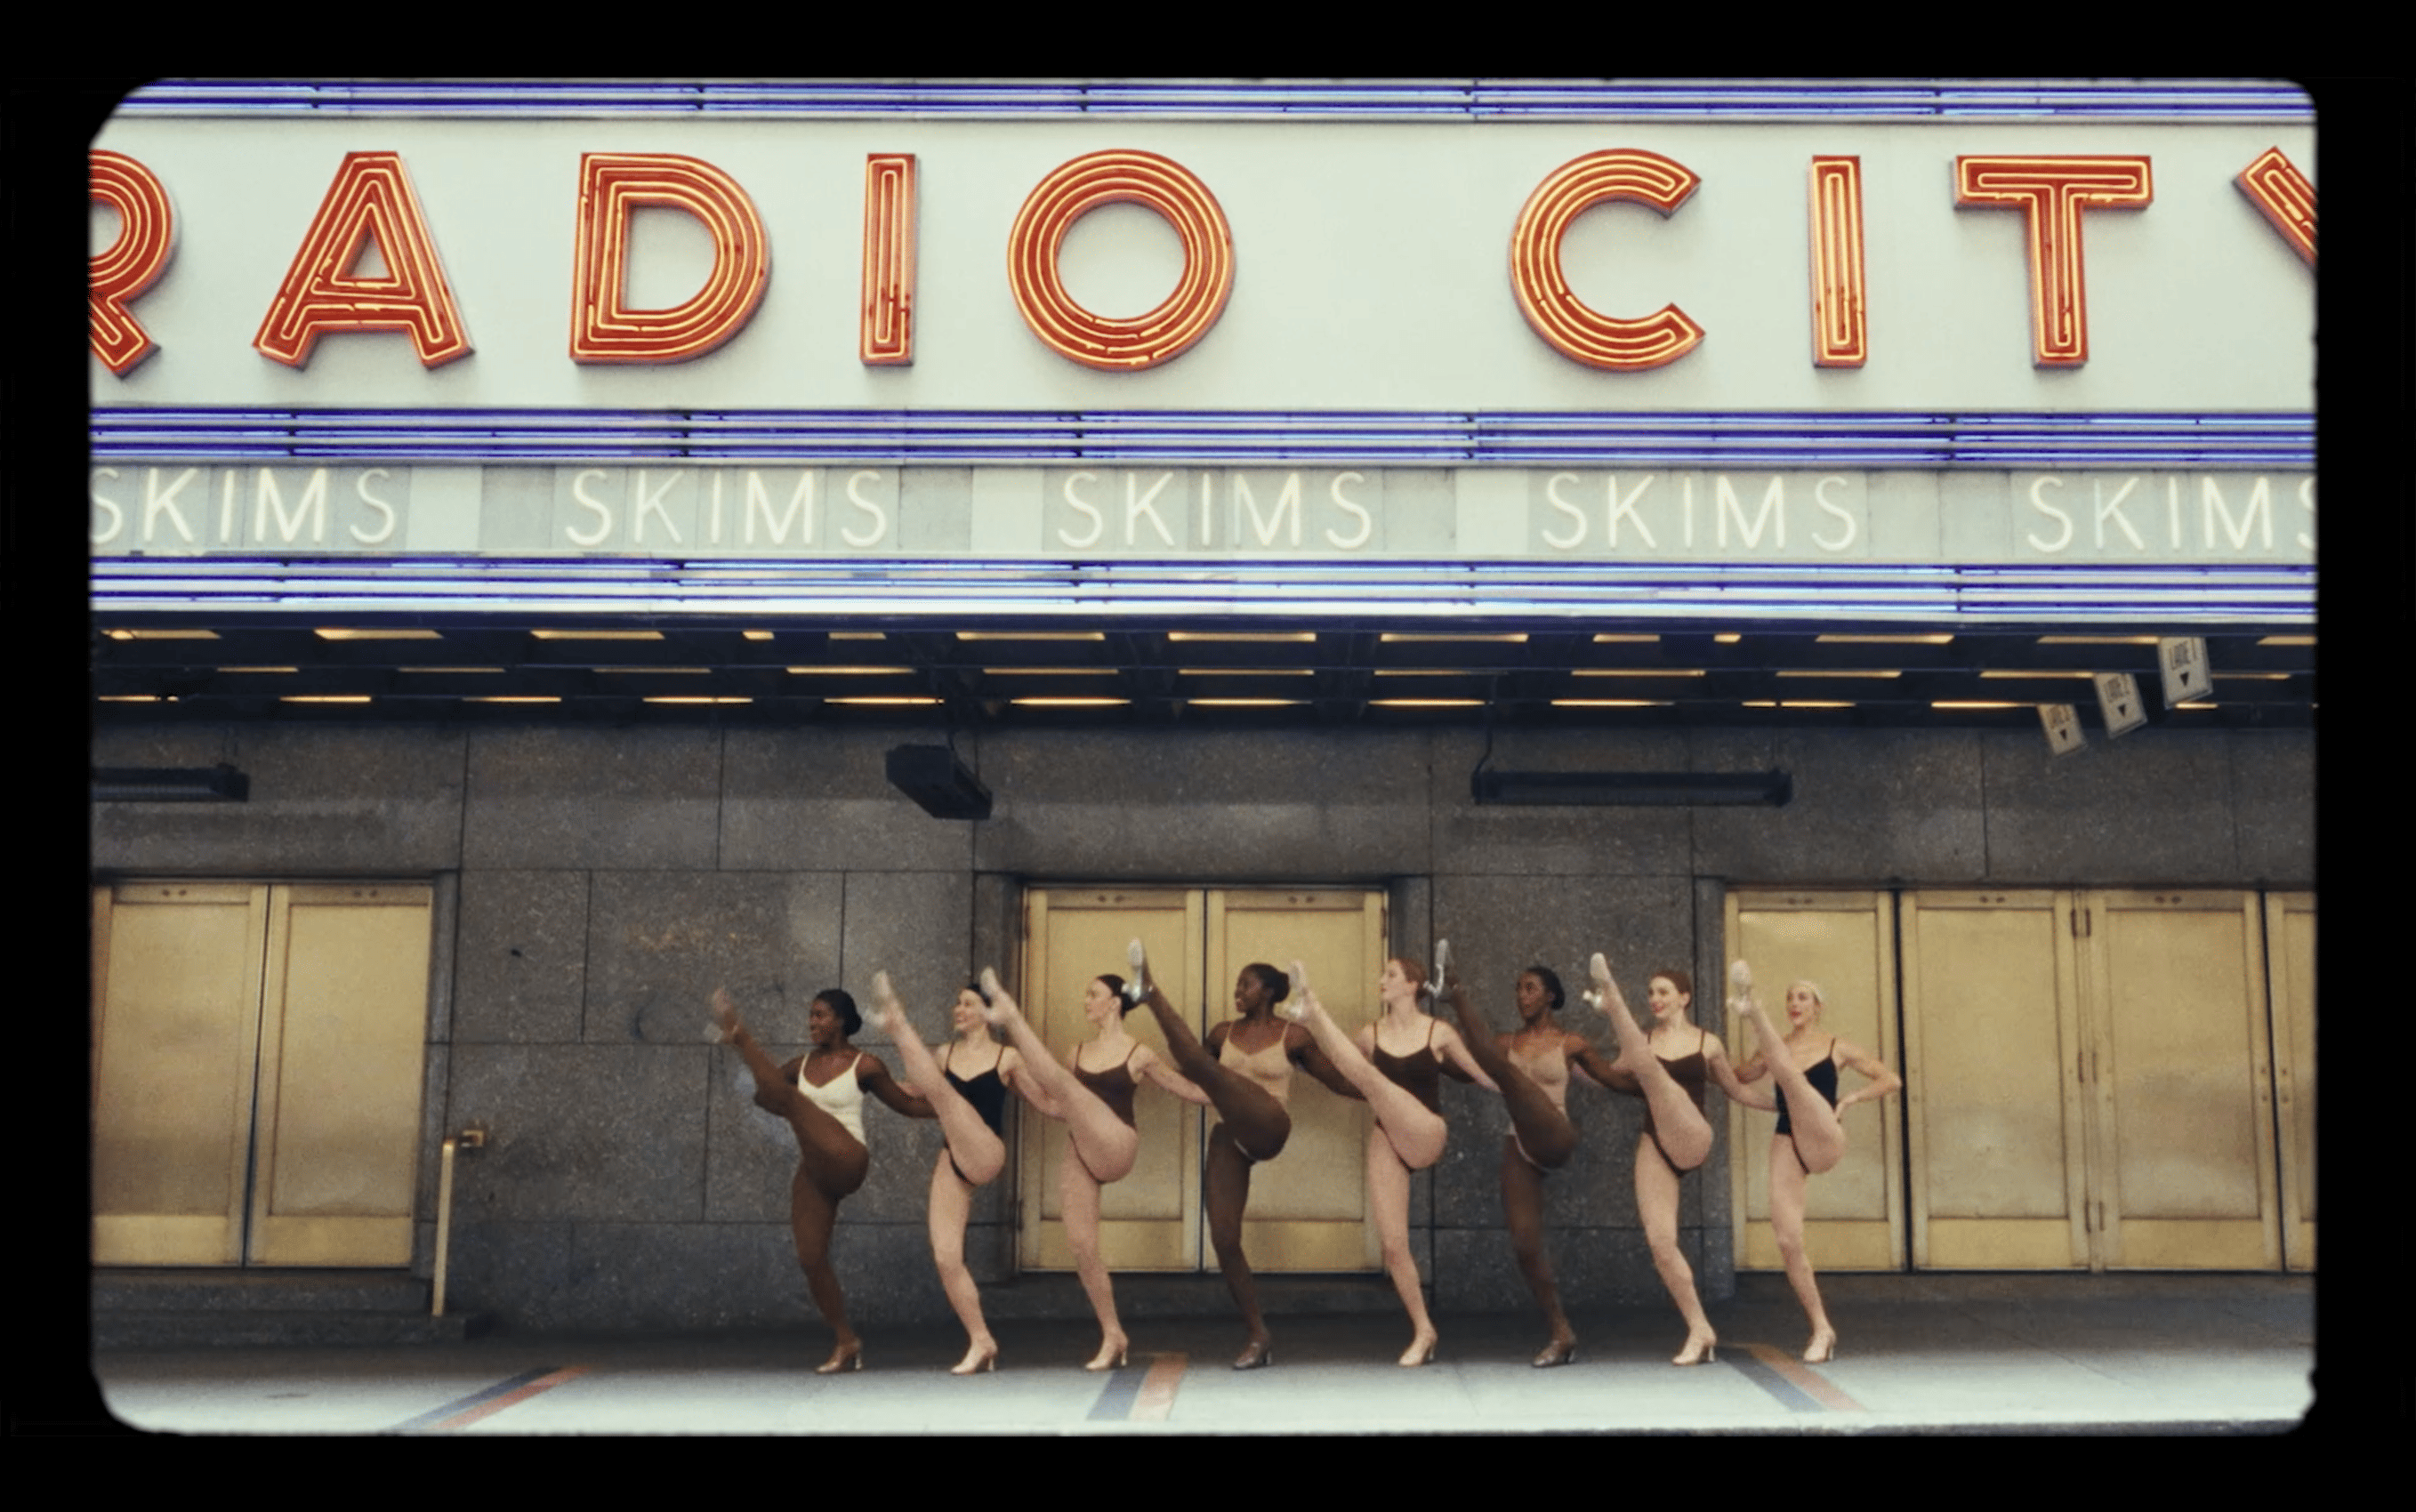 SKIMS Arrives In NYC—With A Little Help From The Rockettes! Rhuigi